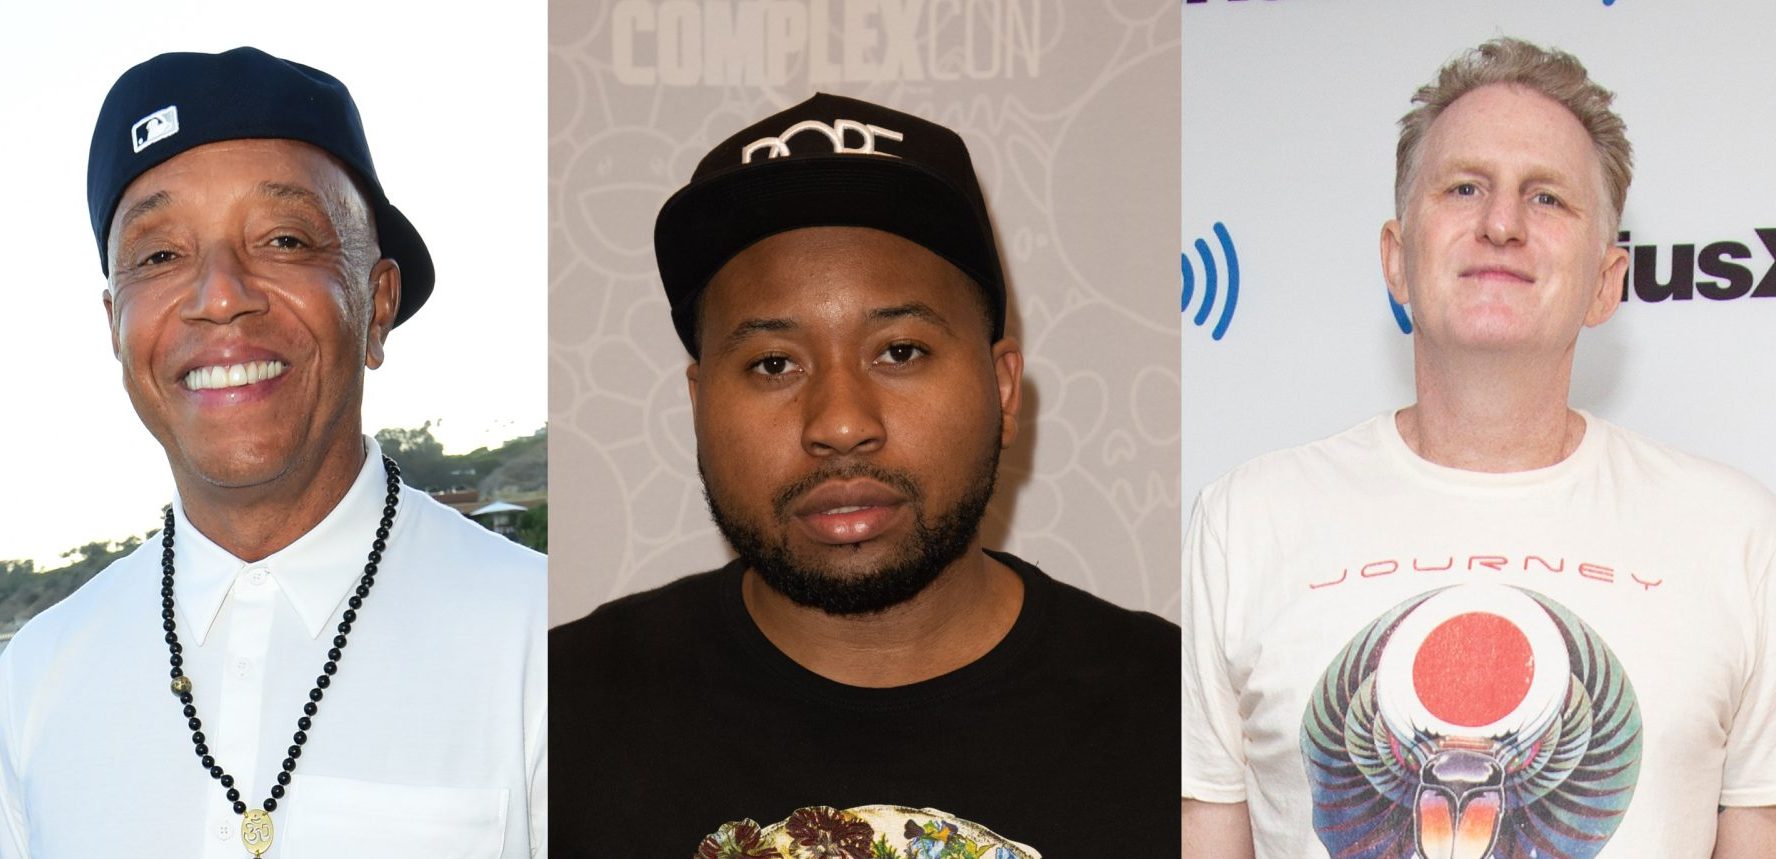 Michael Rapaport & Russell Simmons Clap Back At DJ Akademiks For Calling The Founding Fathers Of Hip-Hop “Dusty”